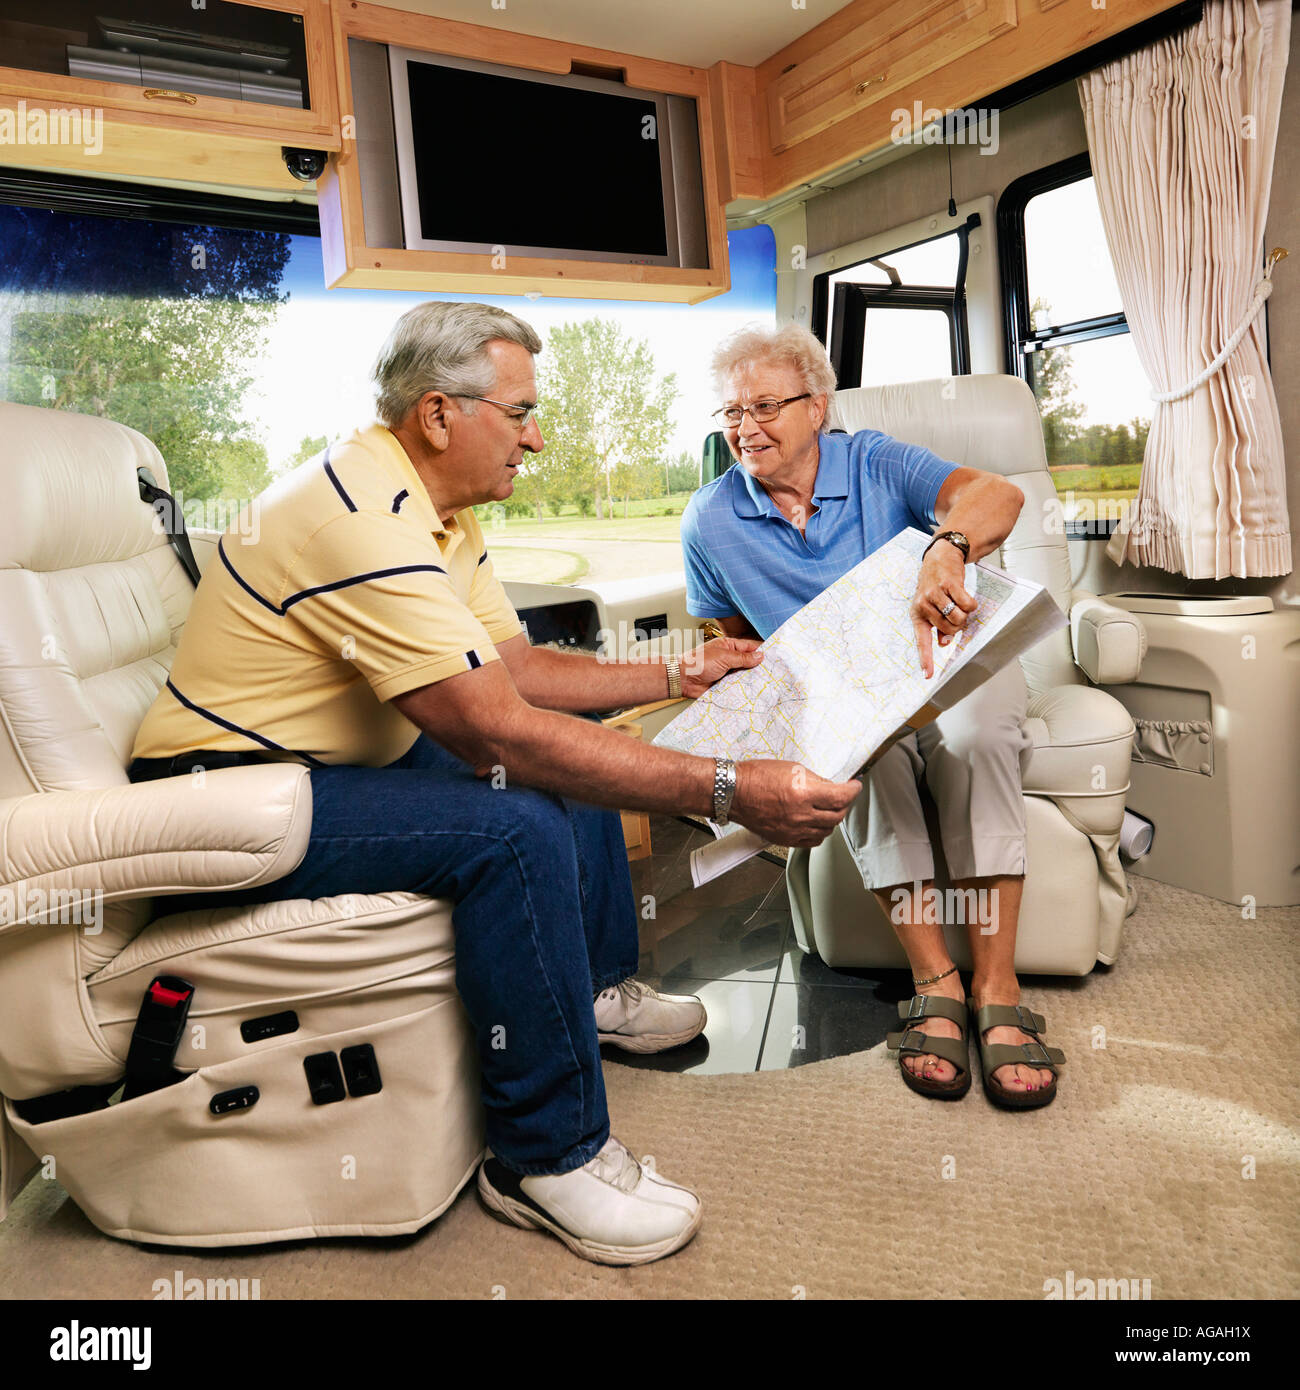 Senior couple sitting in RV looking at map and smiling Banque D'Images